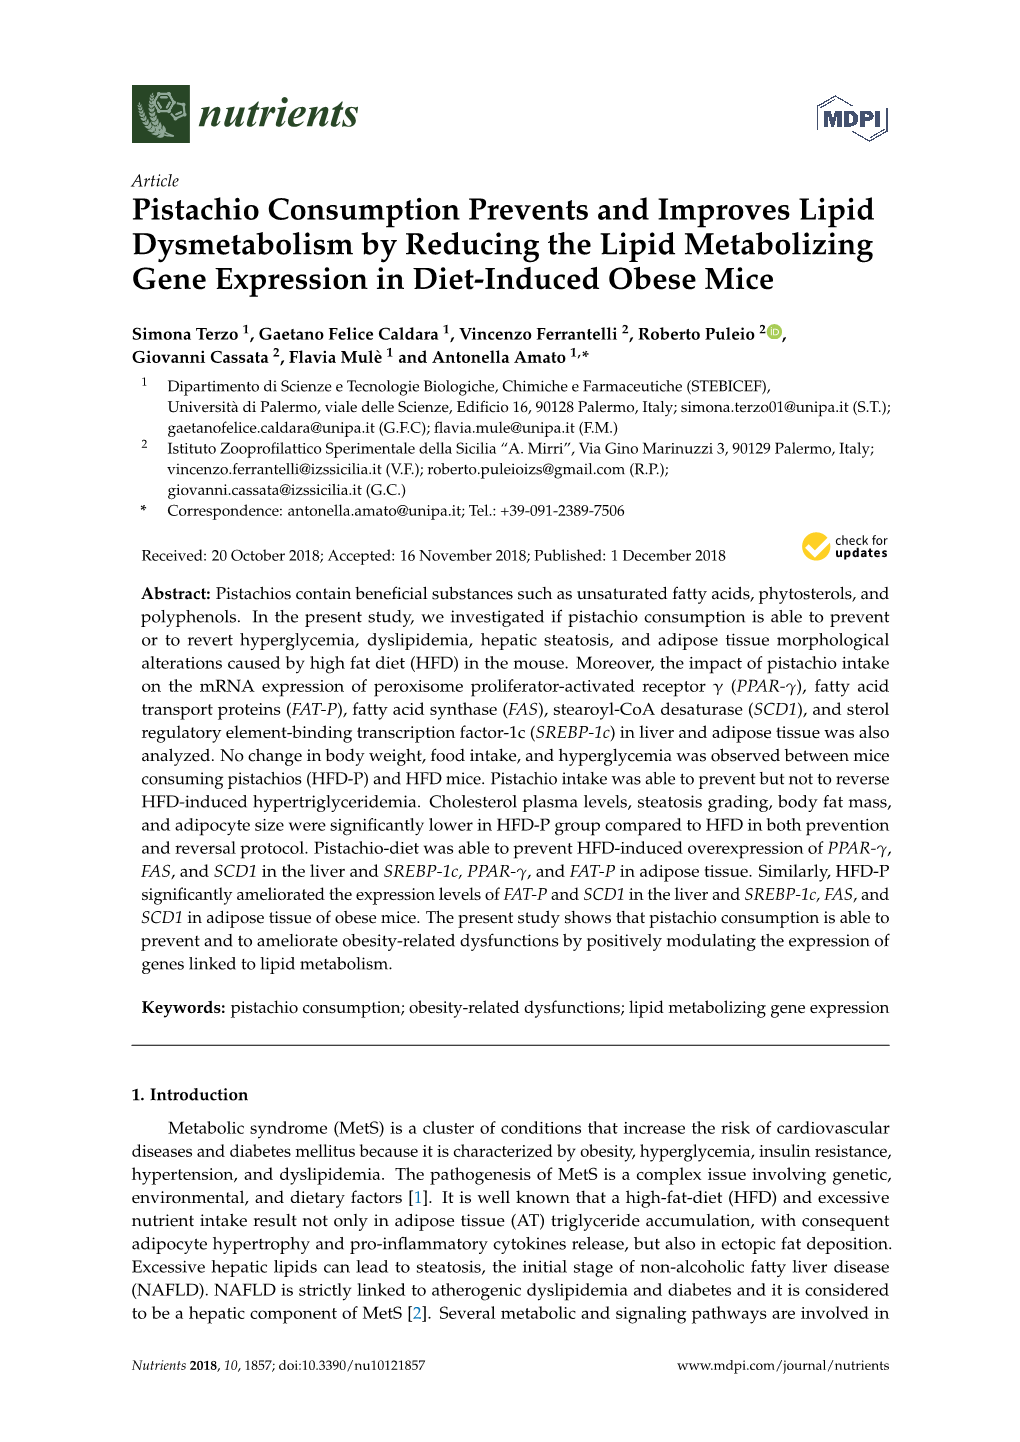 Pistachio Consumption Prevents and Improves Lipid Dysmetabolism by Reducing the Lipid Metabolizing Gene Expression in Diet-Induced Obese Mice